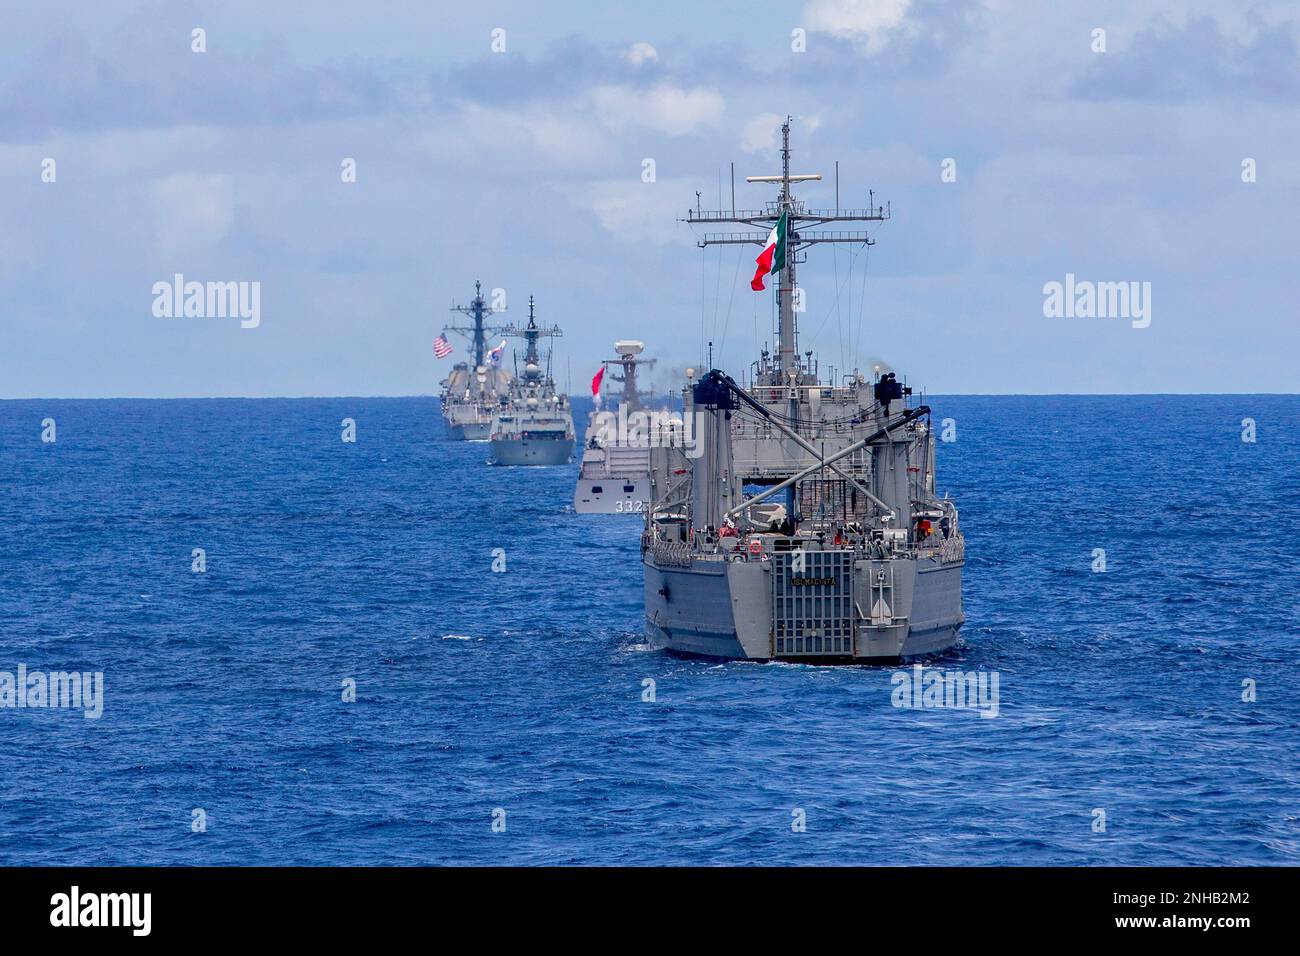 PACIFIC OCEAN (July 28, 2022) From right, Mexican Navy tank landing ship ARM Usumacinta (A 412), Indonesian Navy frigate KRI I Gusti Ngurah Rai (332), Republic of Korea Navy Chungmugong Yi Sun-sin-class destroyer ROKS Munmu The Great (DDH 976) and U.S. Navy Arleigh Burke-class guided-missile destroyer USS Spruance (DDG 111) sail in formation during Rim of the Pacific (RIMPAC) 2022, July 28. Twenty-six nations, 38 ships, three submarines, more than 170 aircraft and 25,000 personnel are participating in RIMPAC from June 29 to Aug. 4 in and around the Hawaiian Islands and Southern California. The Stock Photo